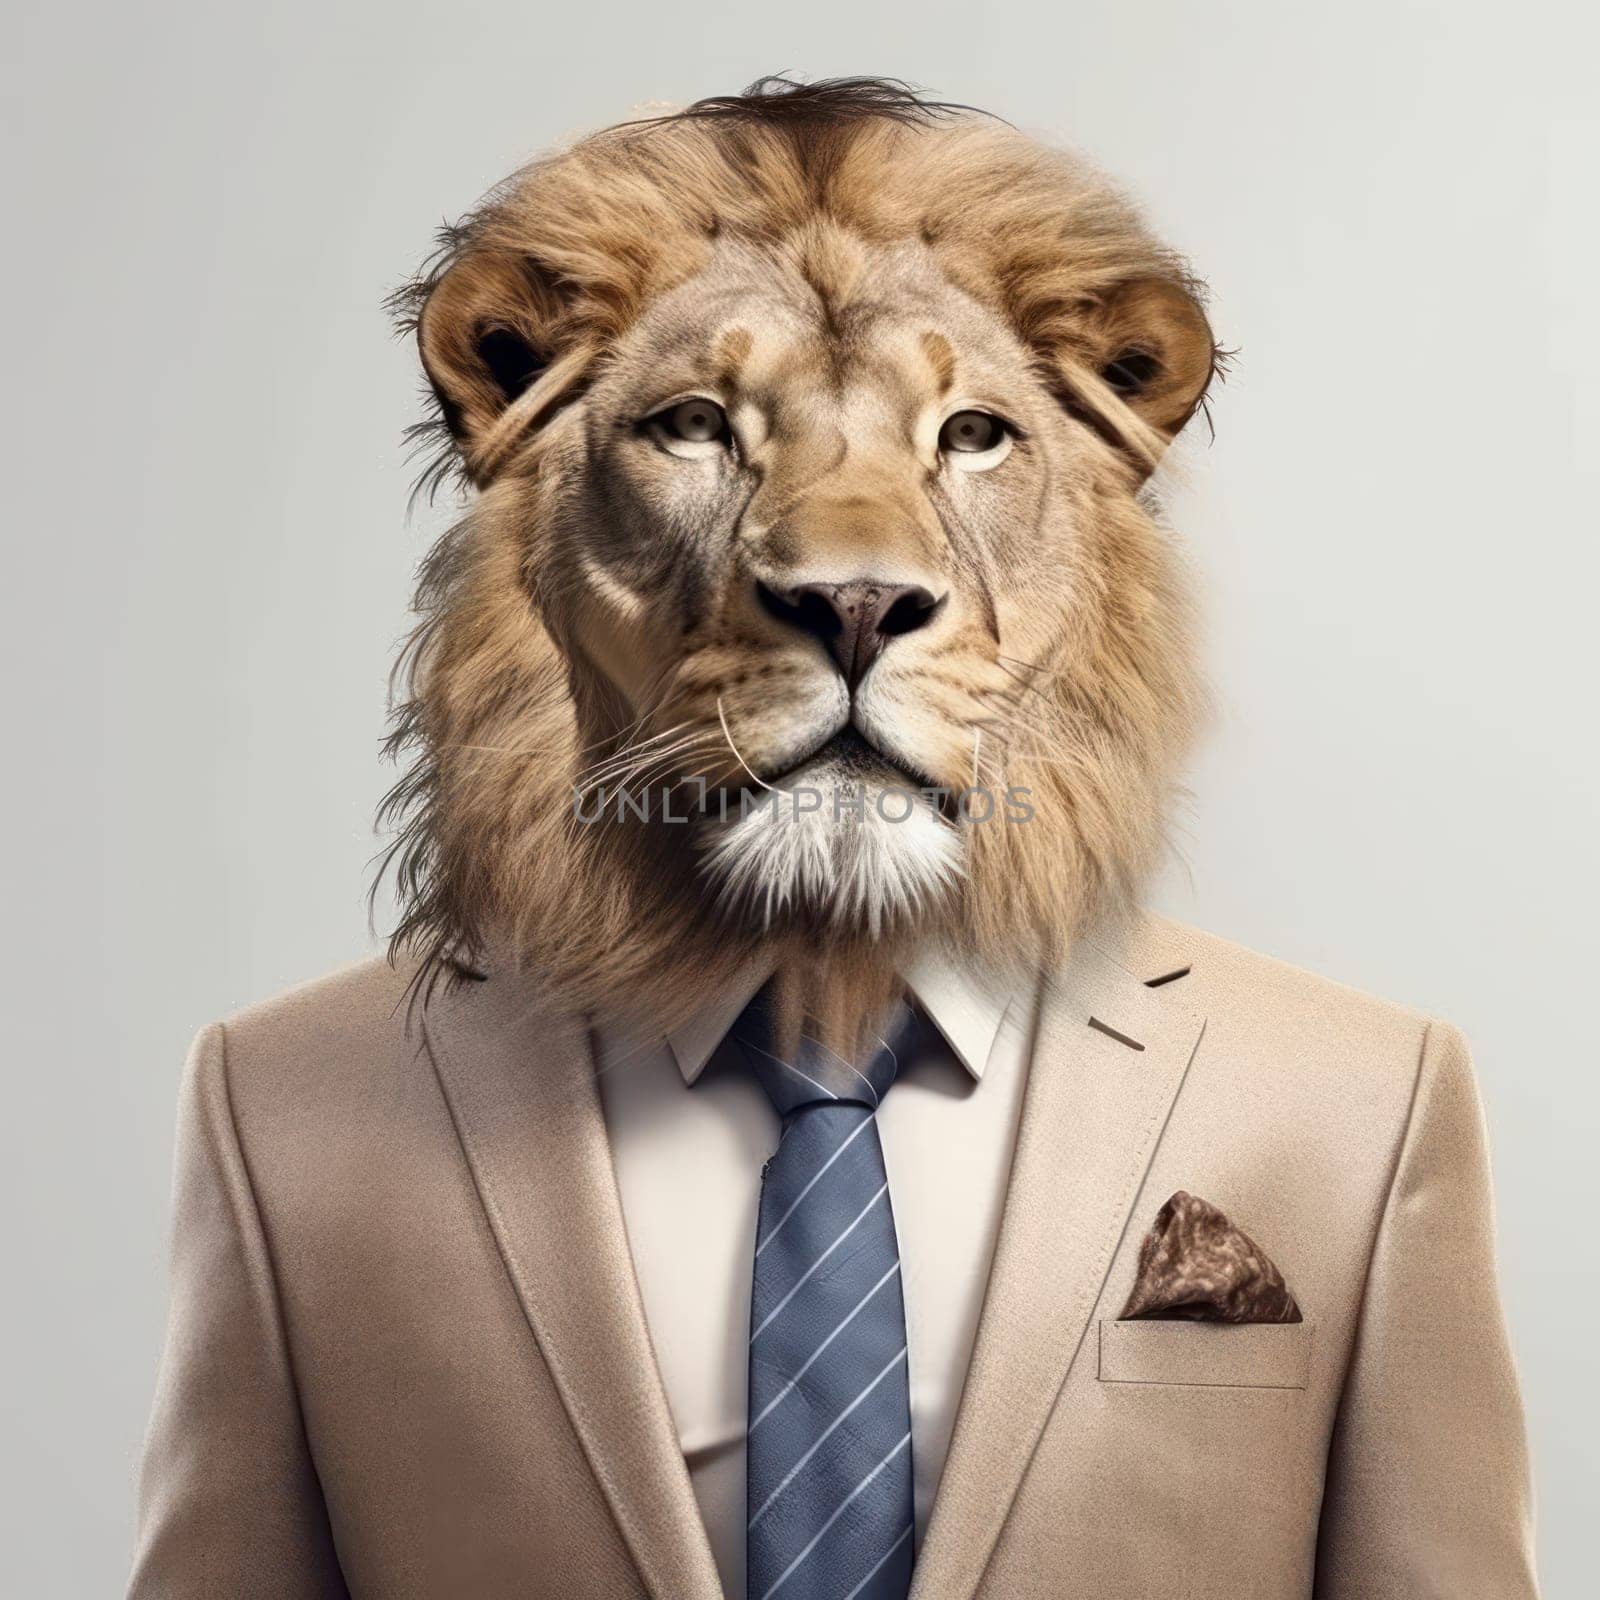 This lion means business Dressed in a suit and tie by Sorapop